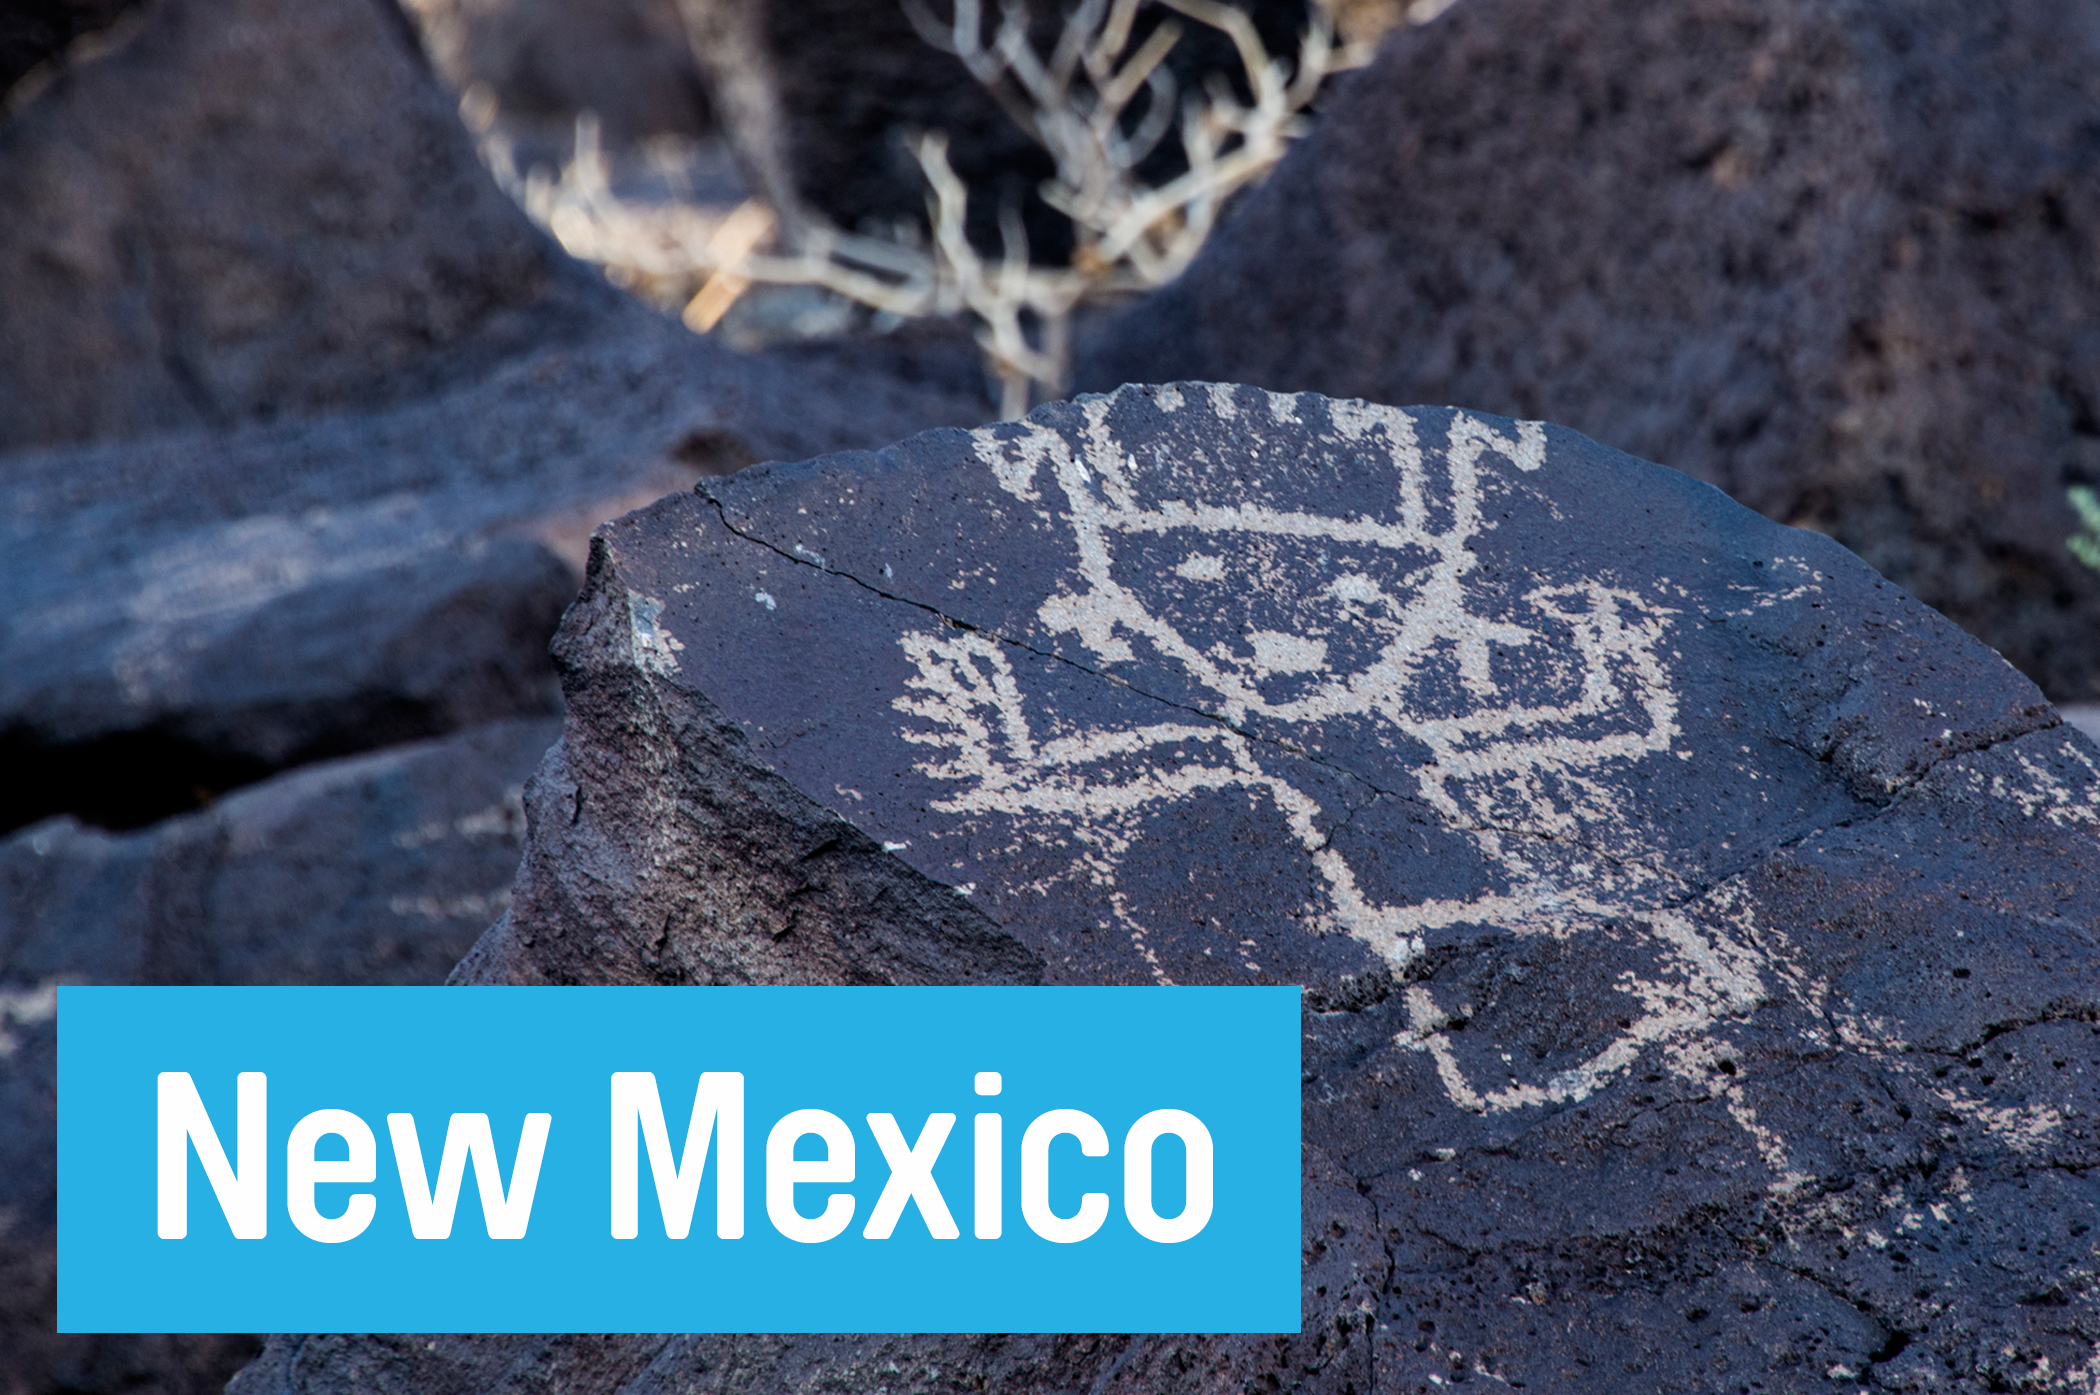 See petroglyphs carved into stone at the circa 1300 A.D. pueblos at <a href="http://www.nps.gov/petr/planyourvisit/pueblos.htm" target="_blank">Petroglyph National Monument.</a> In a way, you might call these ur-Emojis.